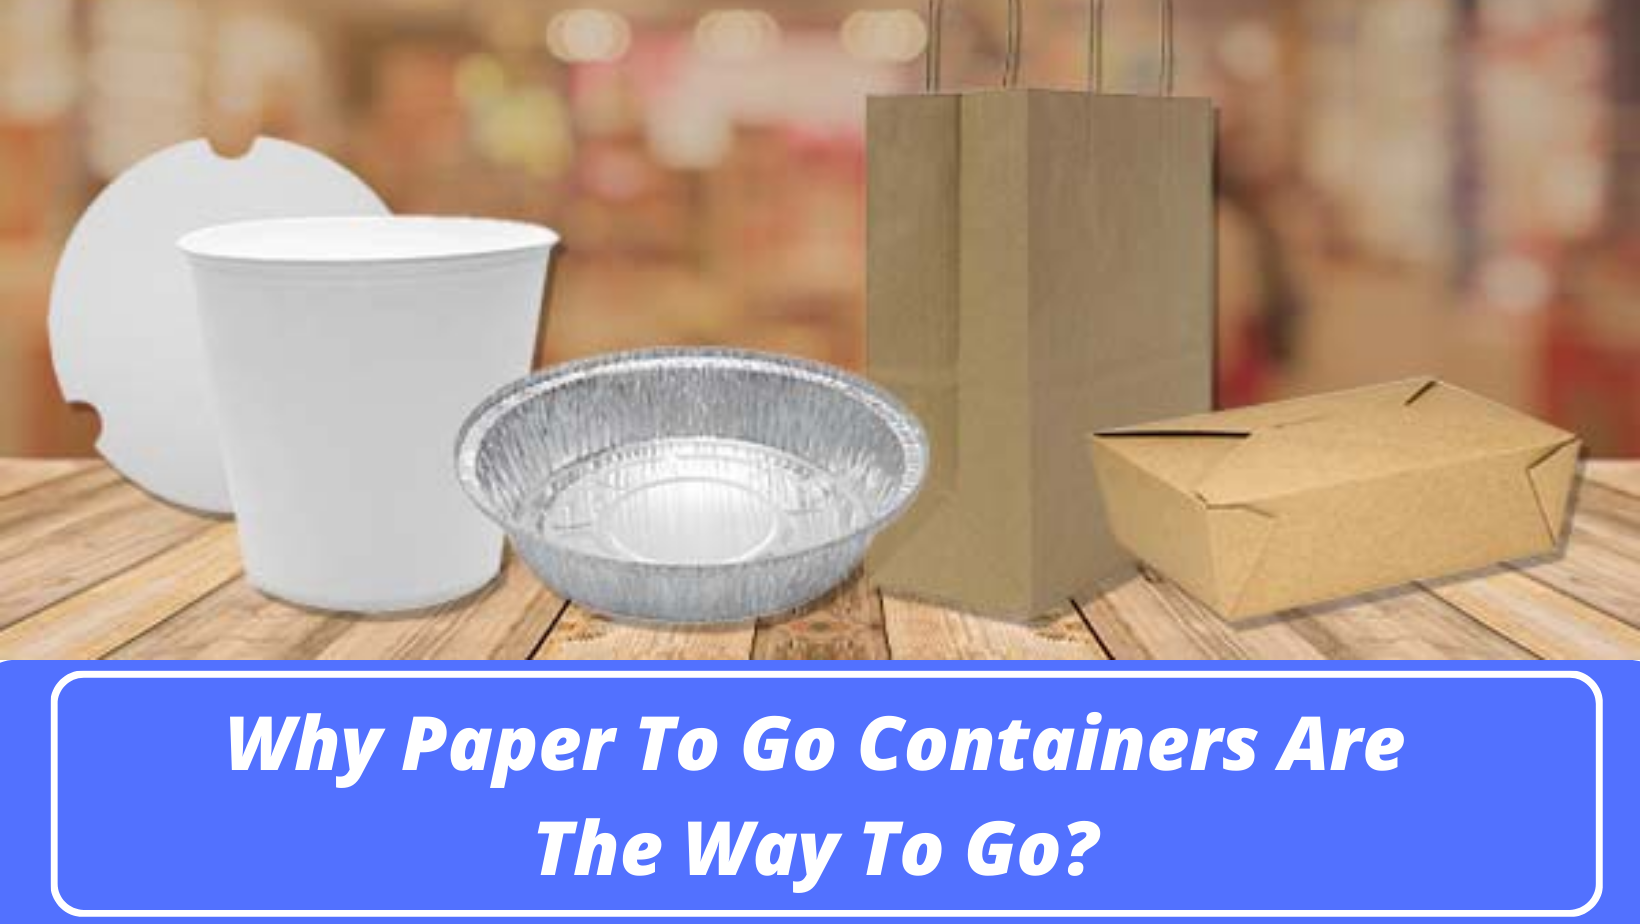 Takeout Containers (Fiber or Paperboard) - Lawrence Berkeley